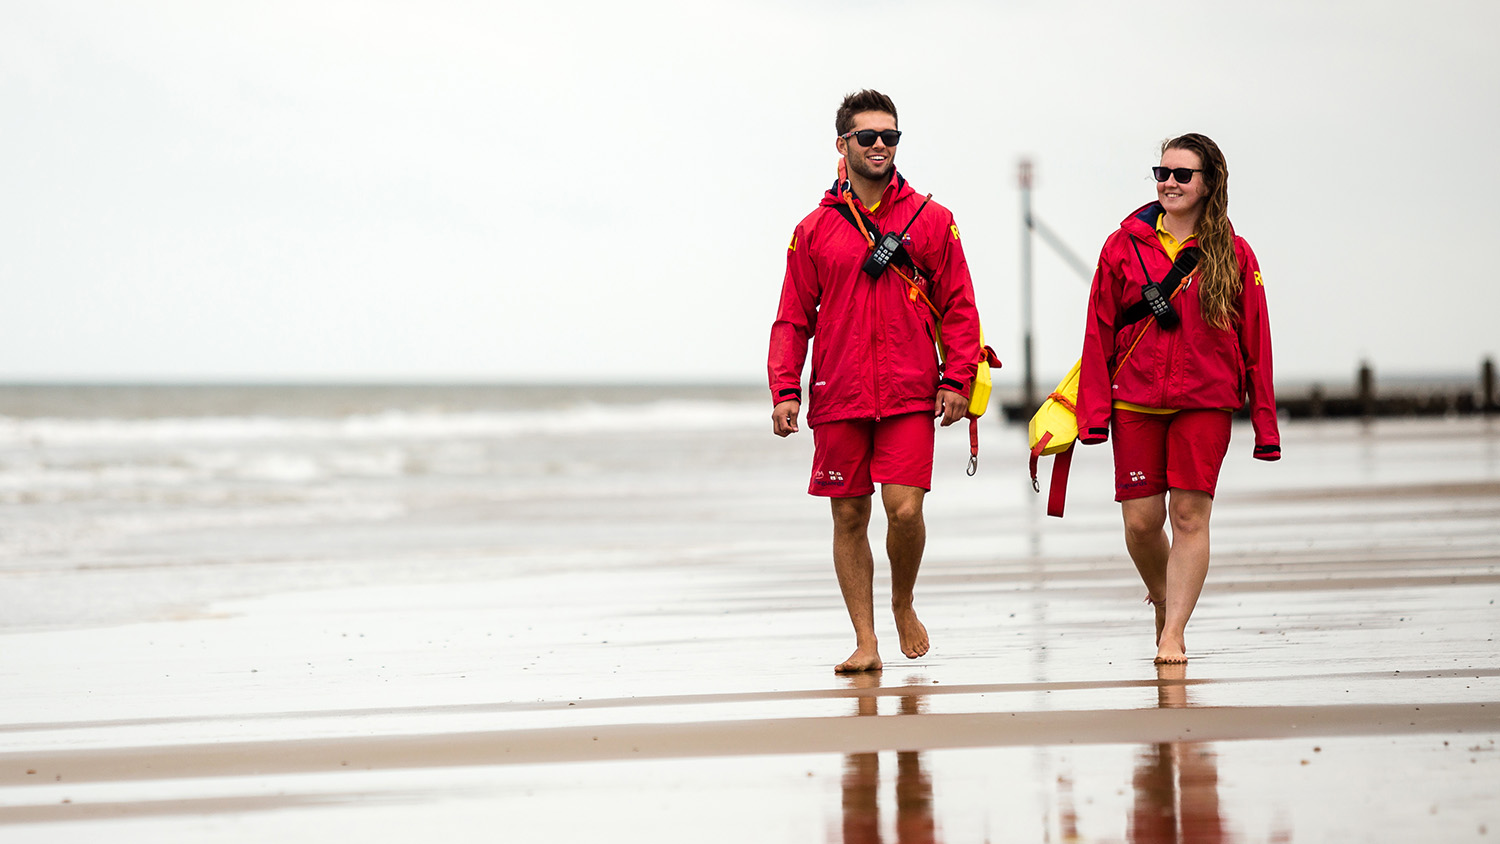 Two lifeguards walk along the shore, carrying rescue tubes and wearing VHF radios